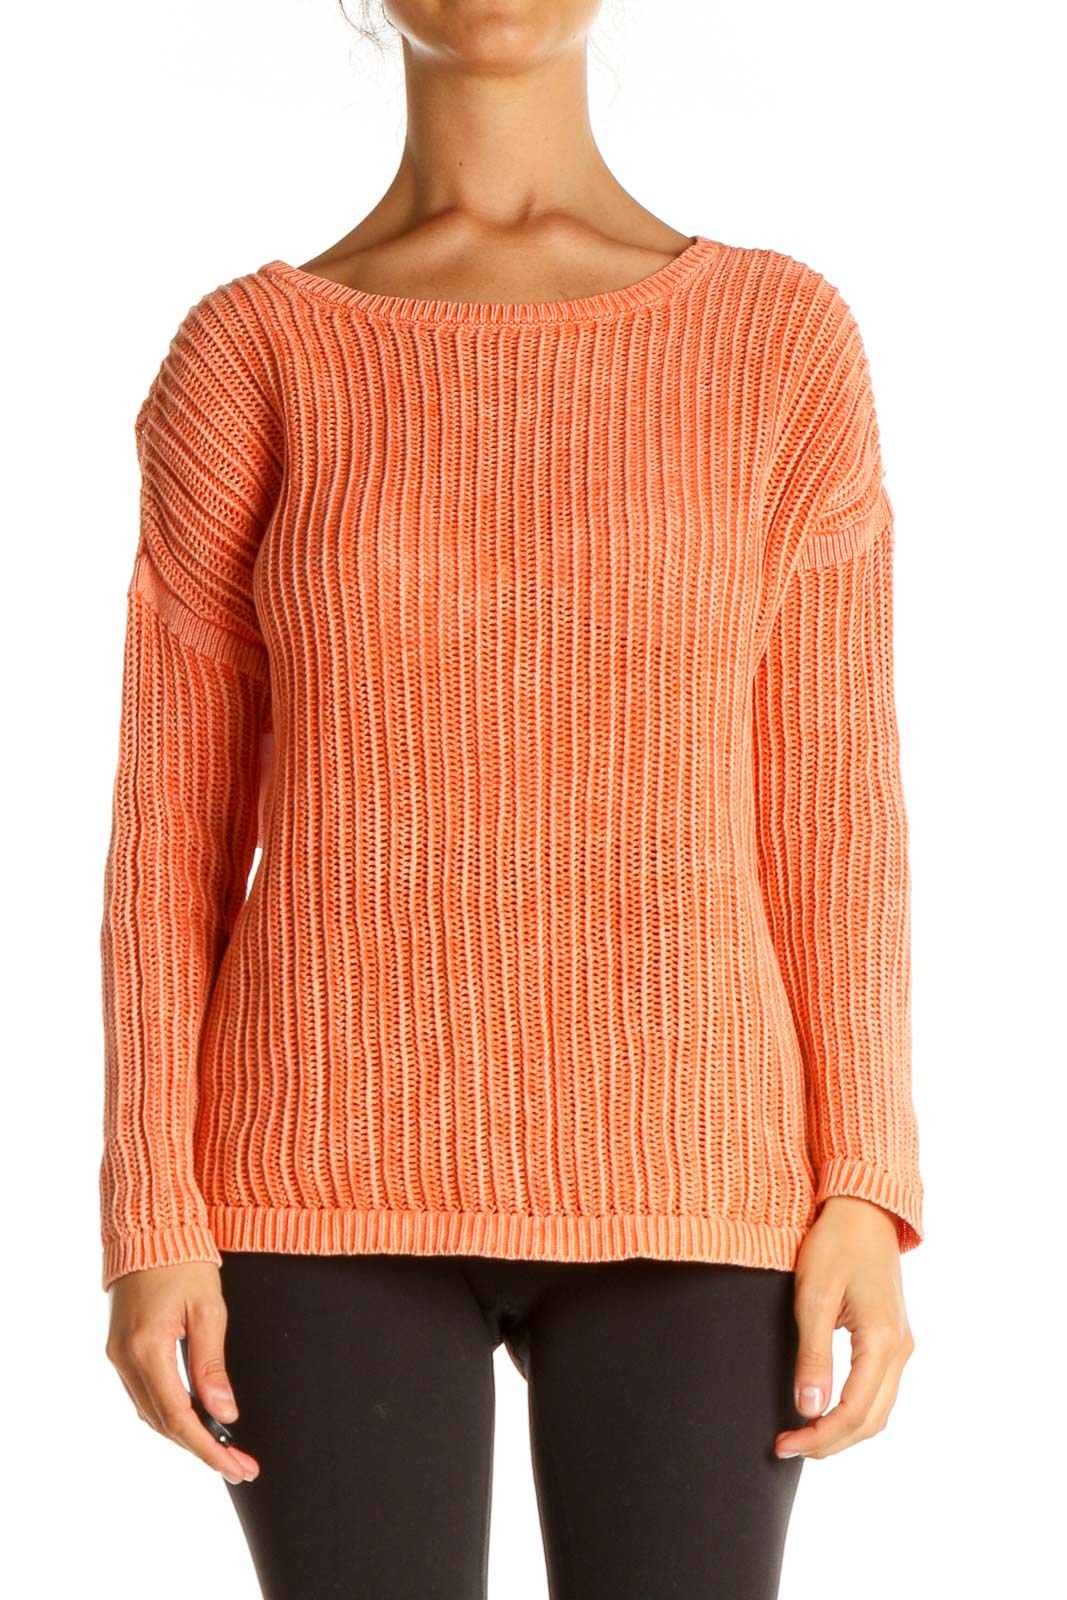 Orange Textured Casual Sweater Front